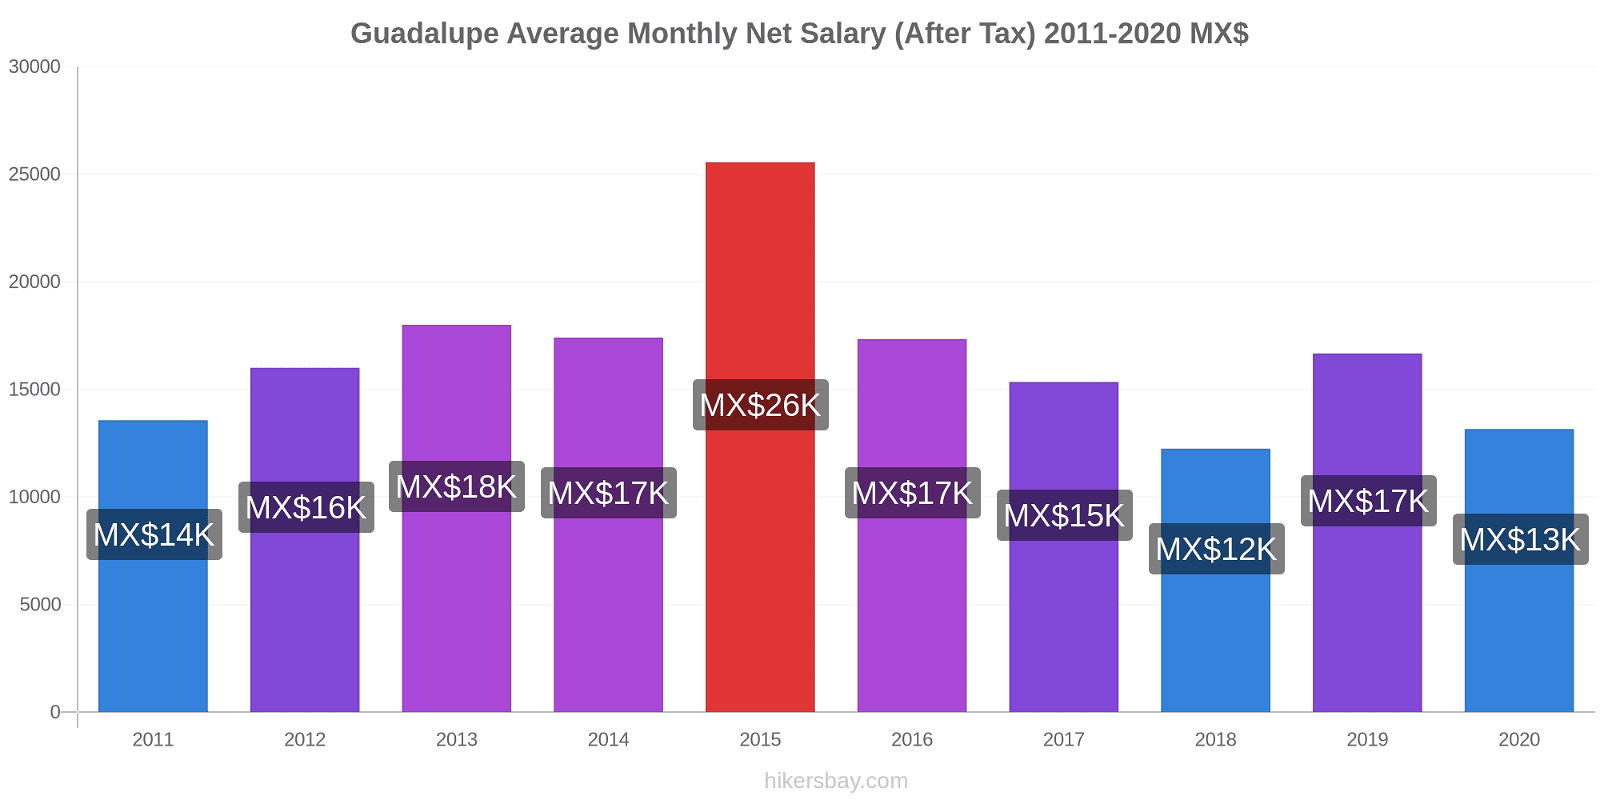 Guadalupe price changes Average Monthly Net Salary (After Tax) hikersbay.com